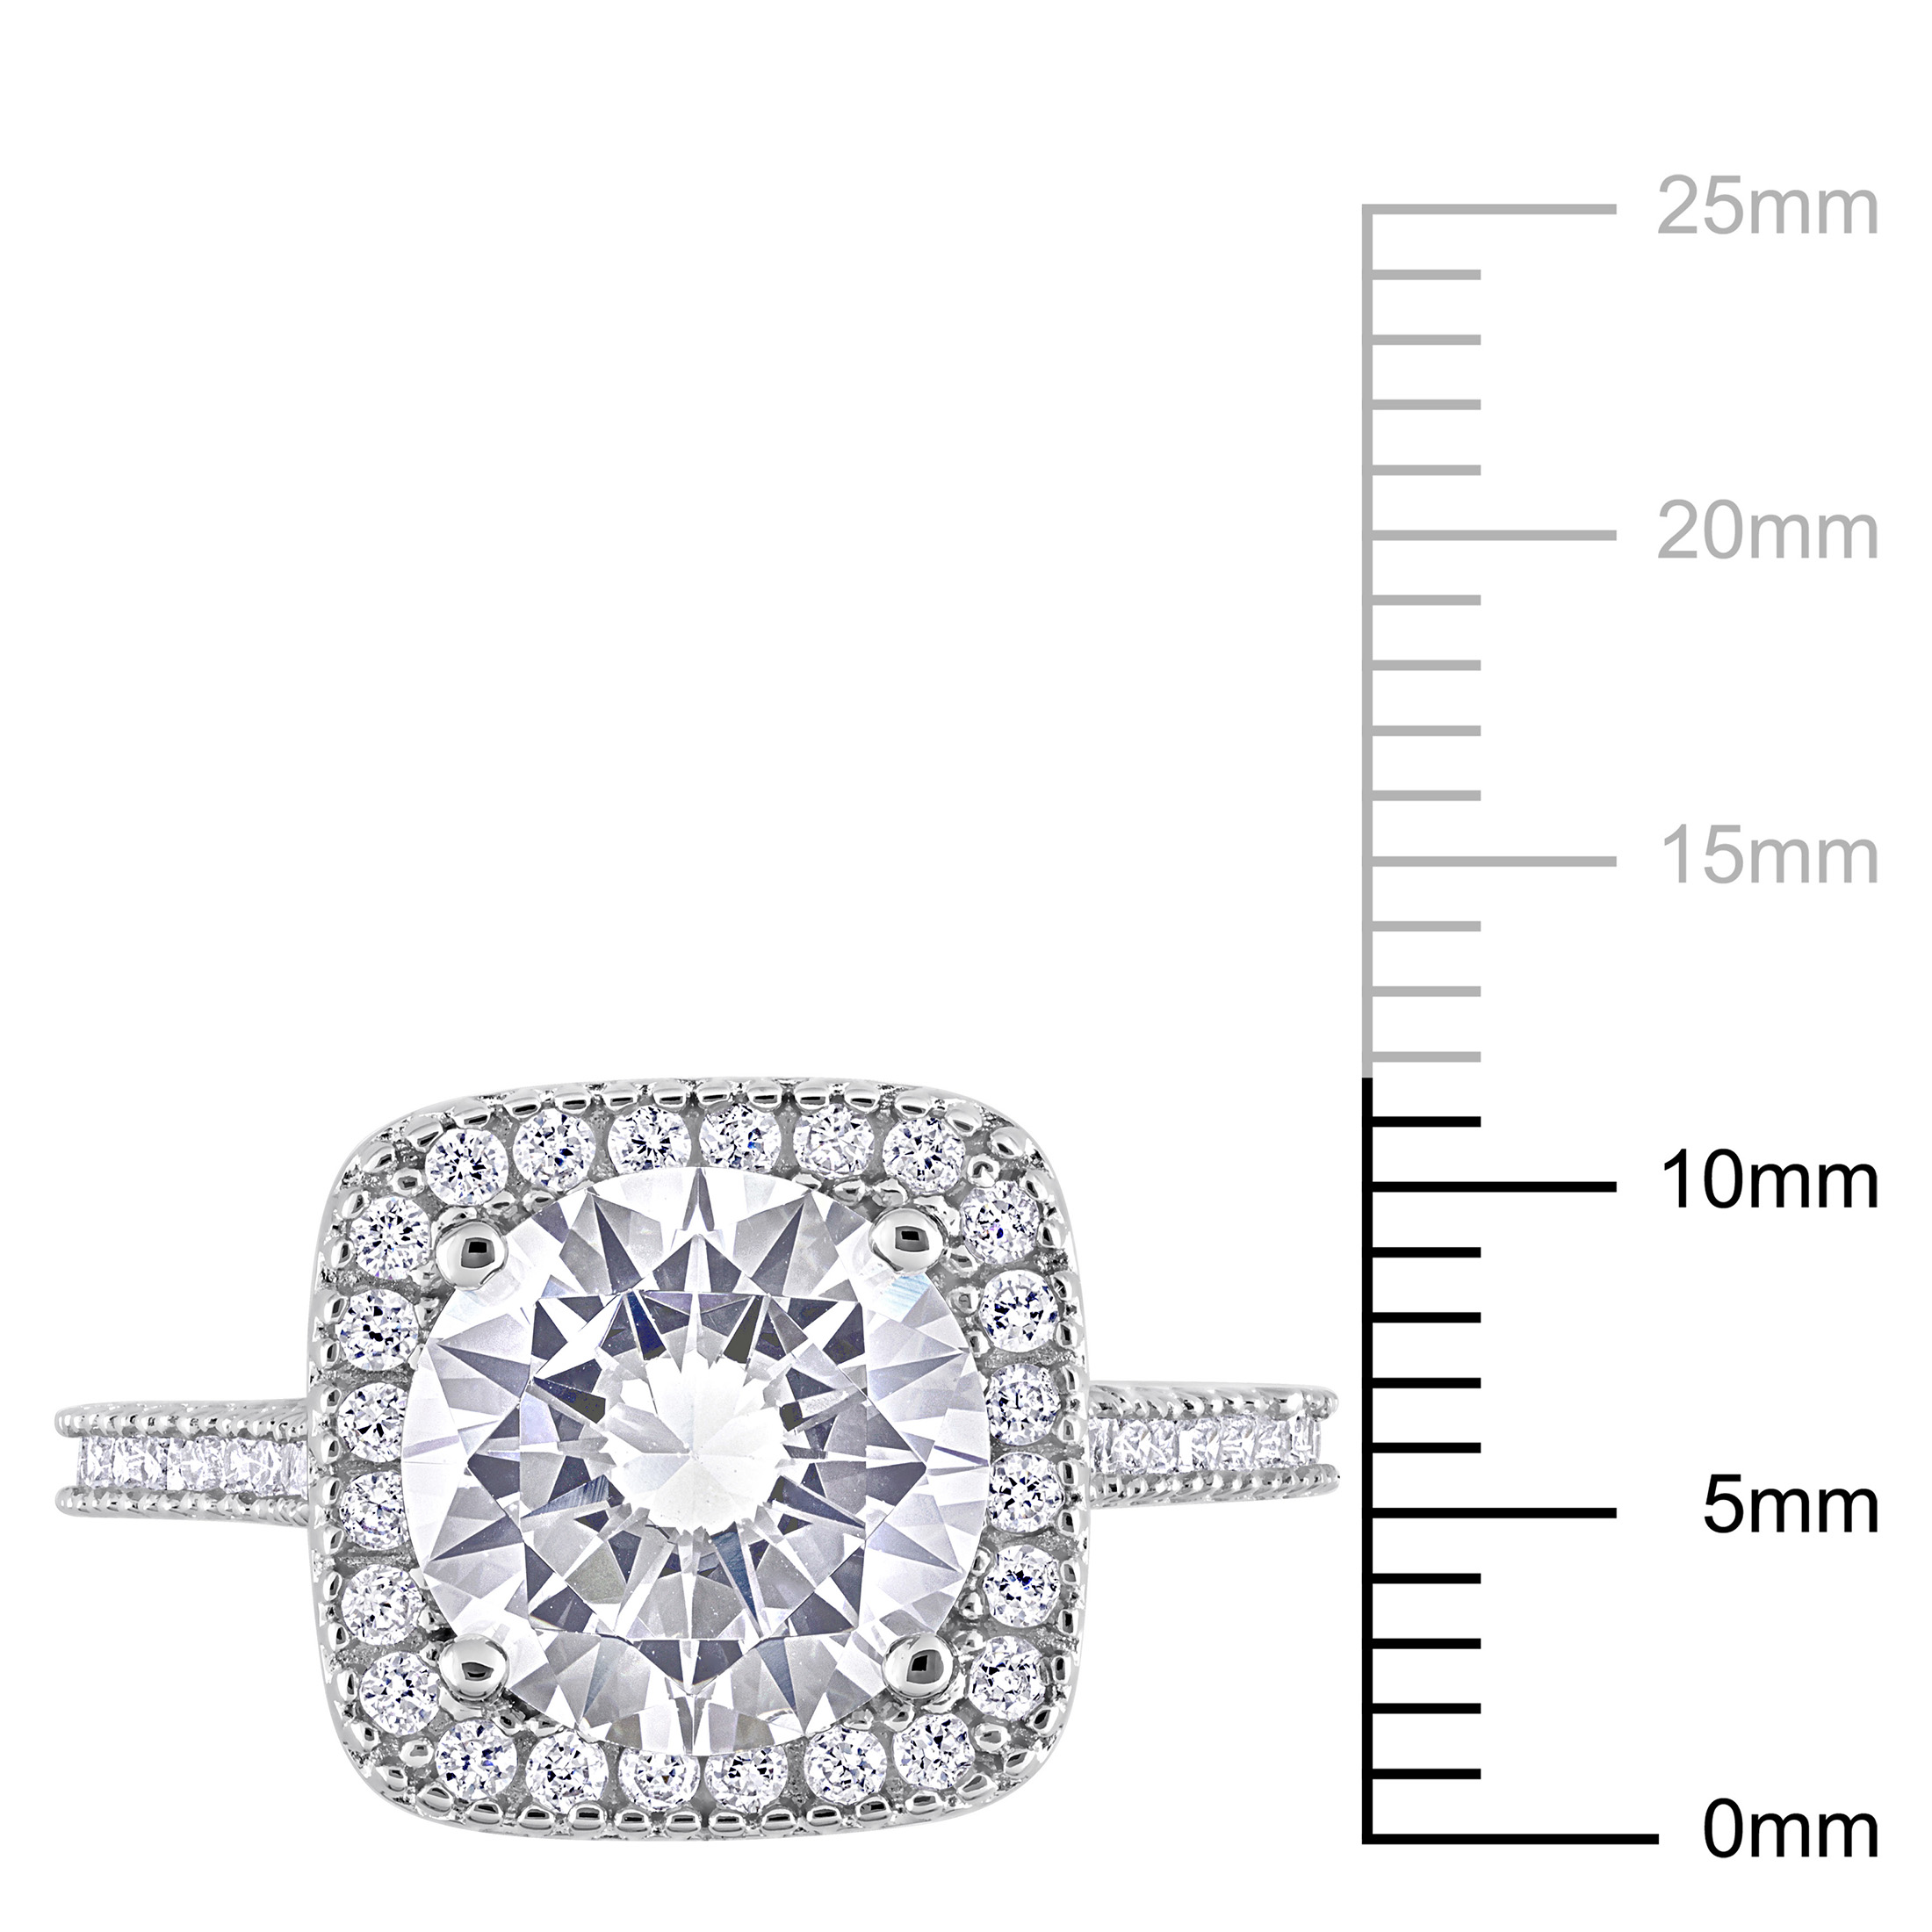 Everly Women's 5 Carat T.G.W. Round-Cut Halo Engagement Ring Cubic Zirconia in Sterling Silver with Round-Cut Cubic Zirconia's on Band - image 3 of 8